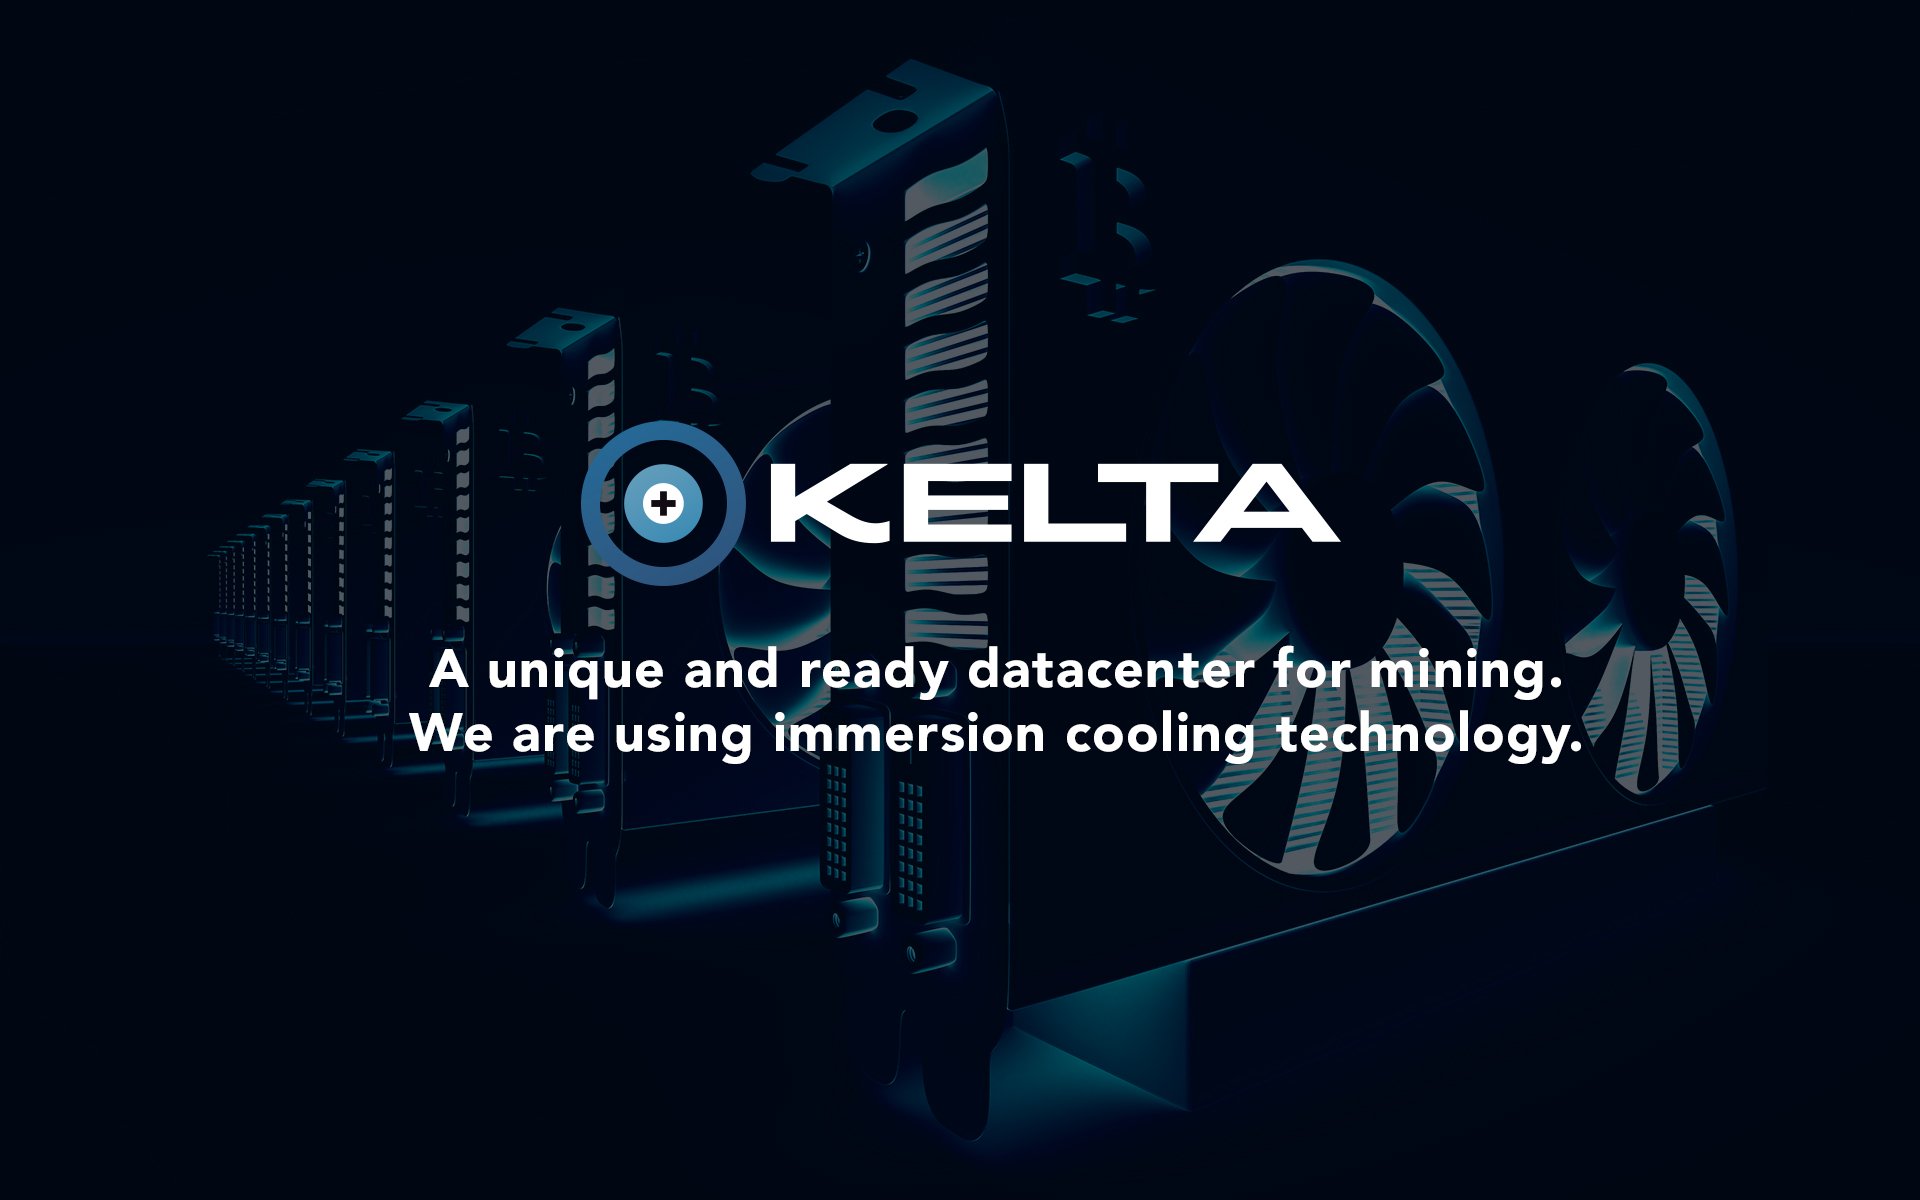 Kelta’s Pre-ICO Is Over. The Main Token Sale Started on April 2